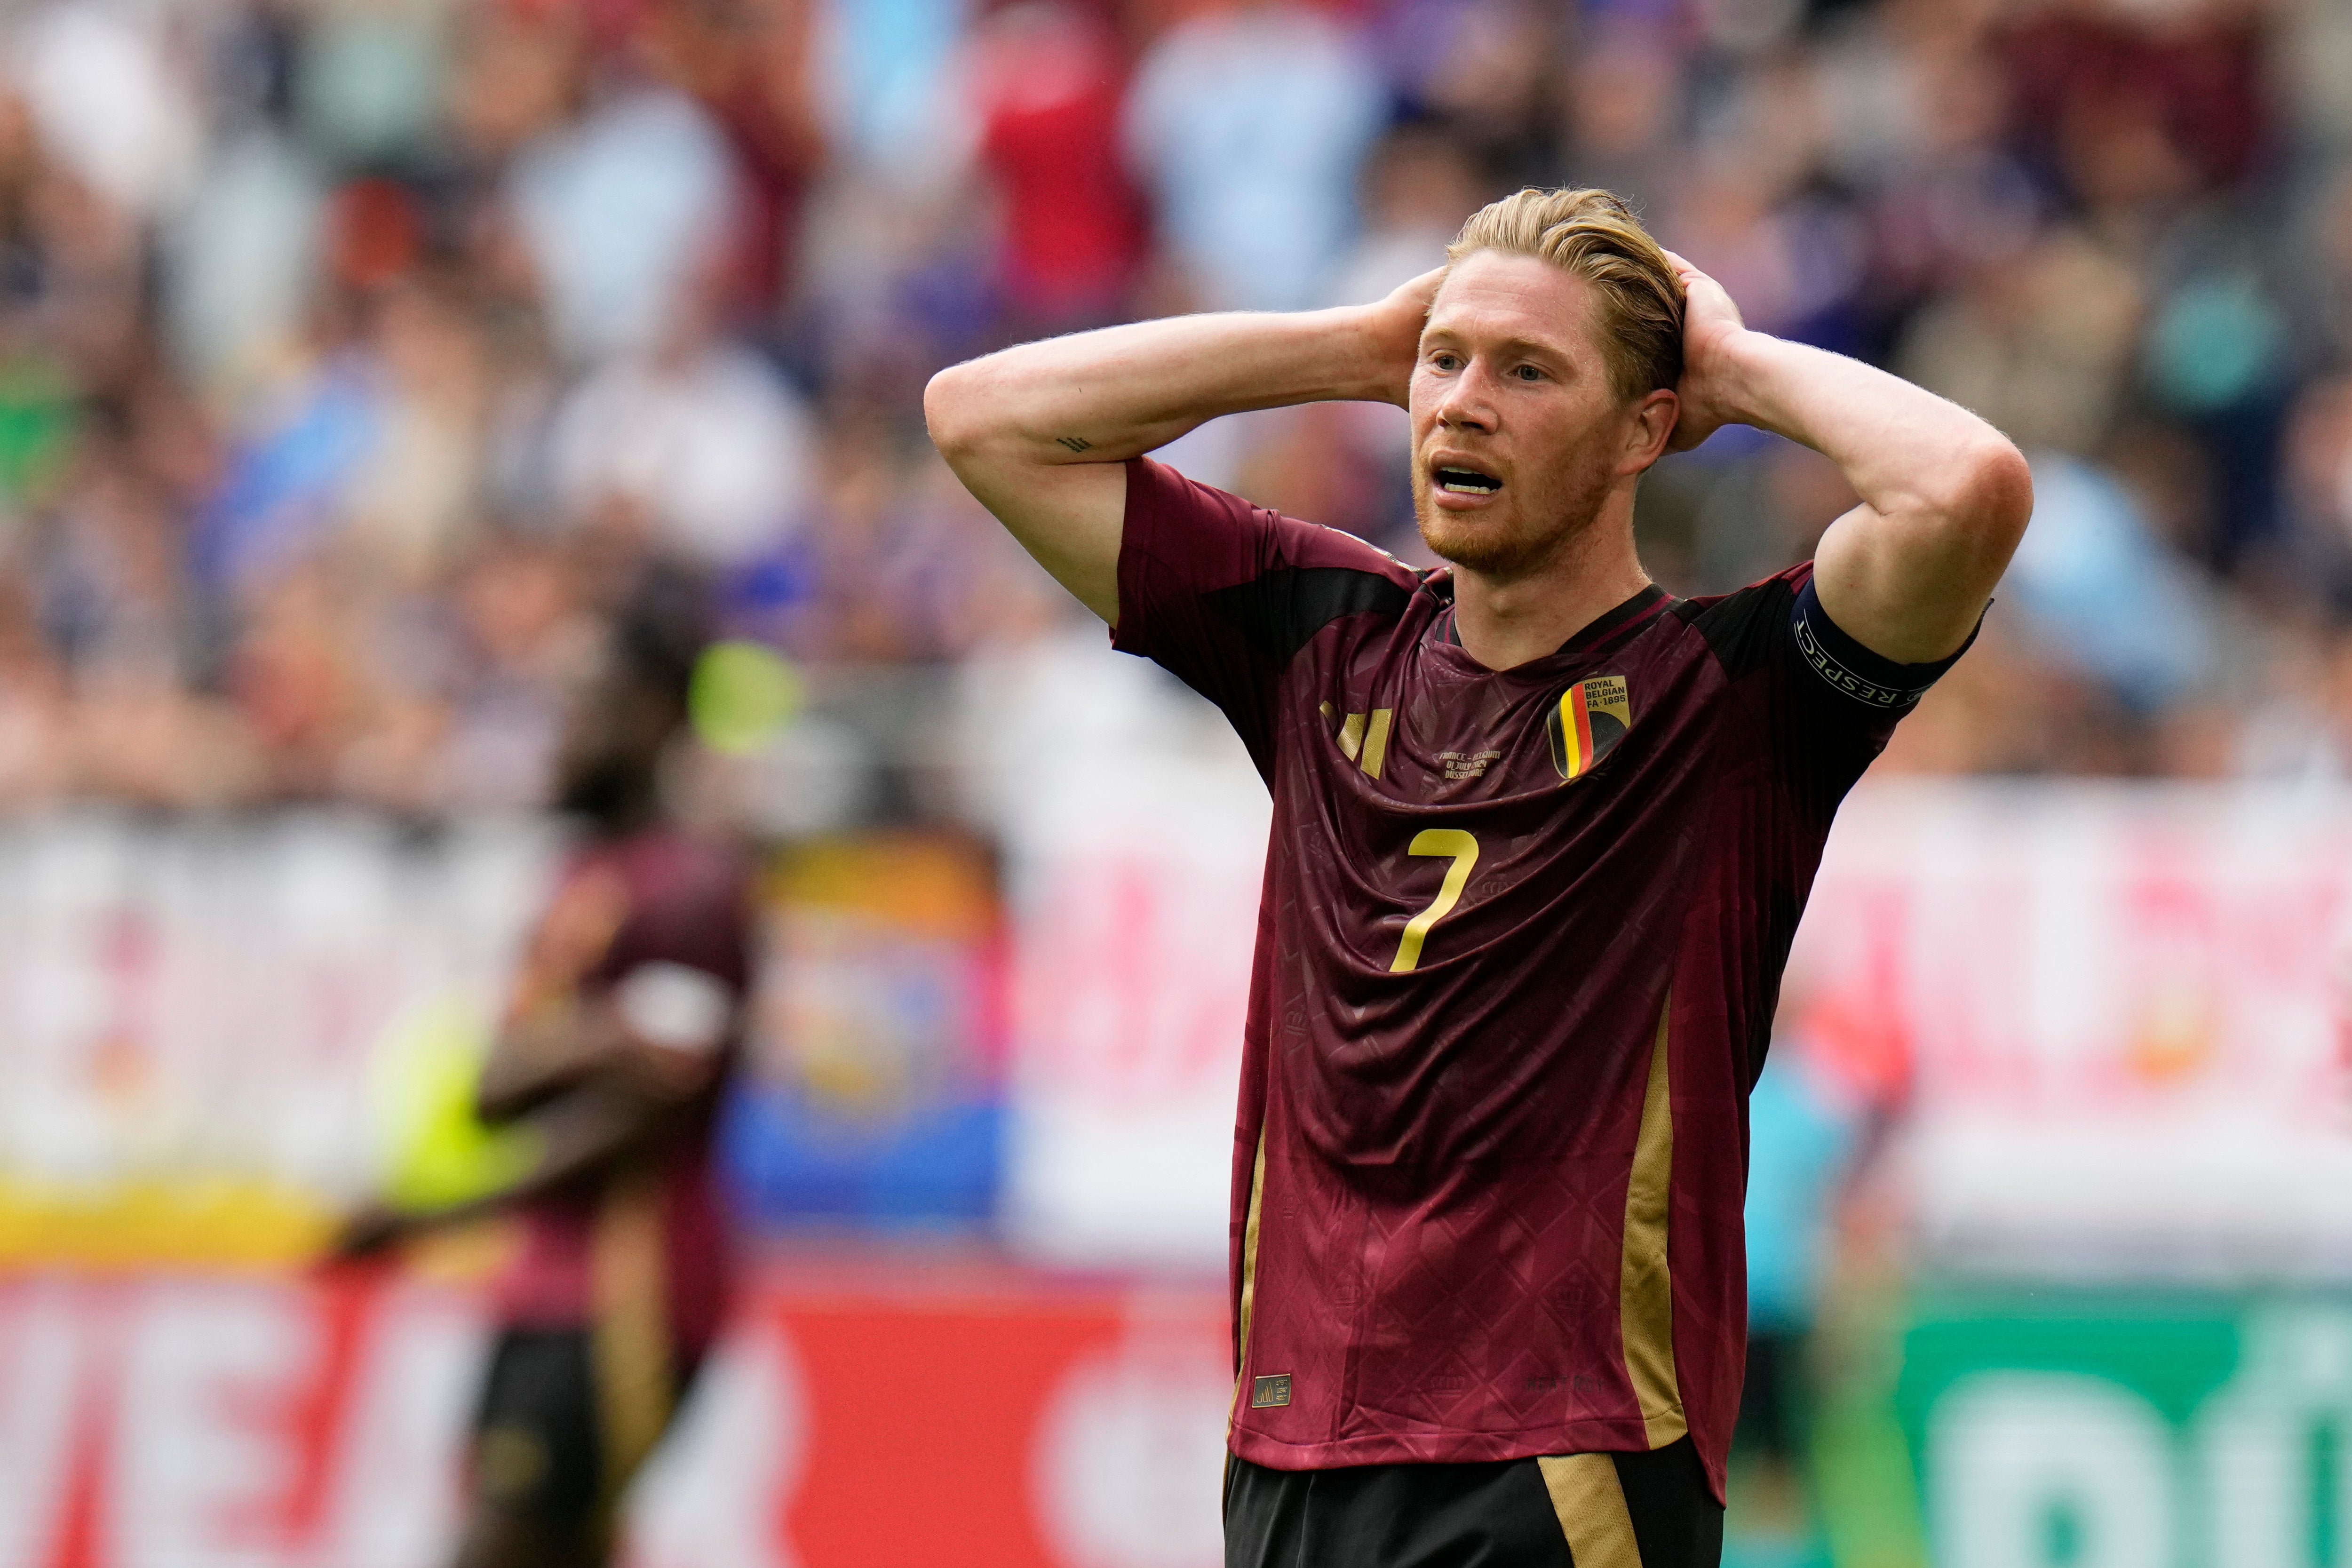 Kevin De Bruyne was not pleased with the questions after Belgium’s defeat